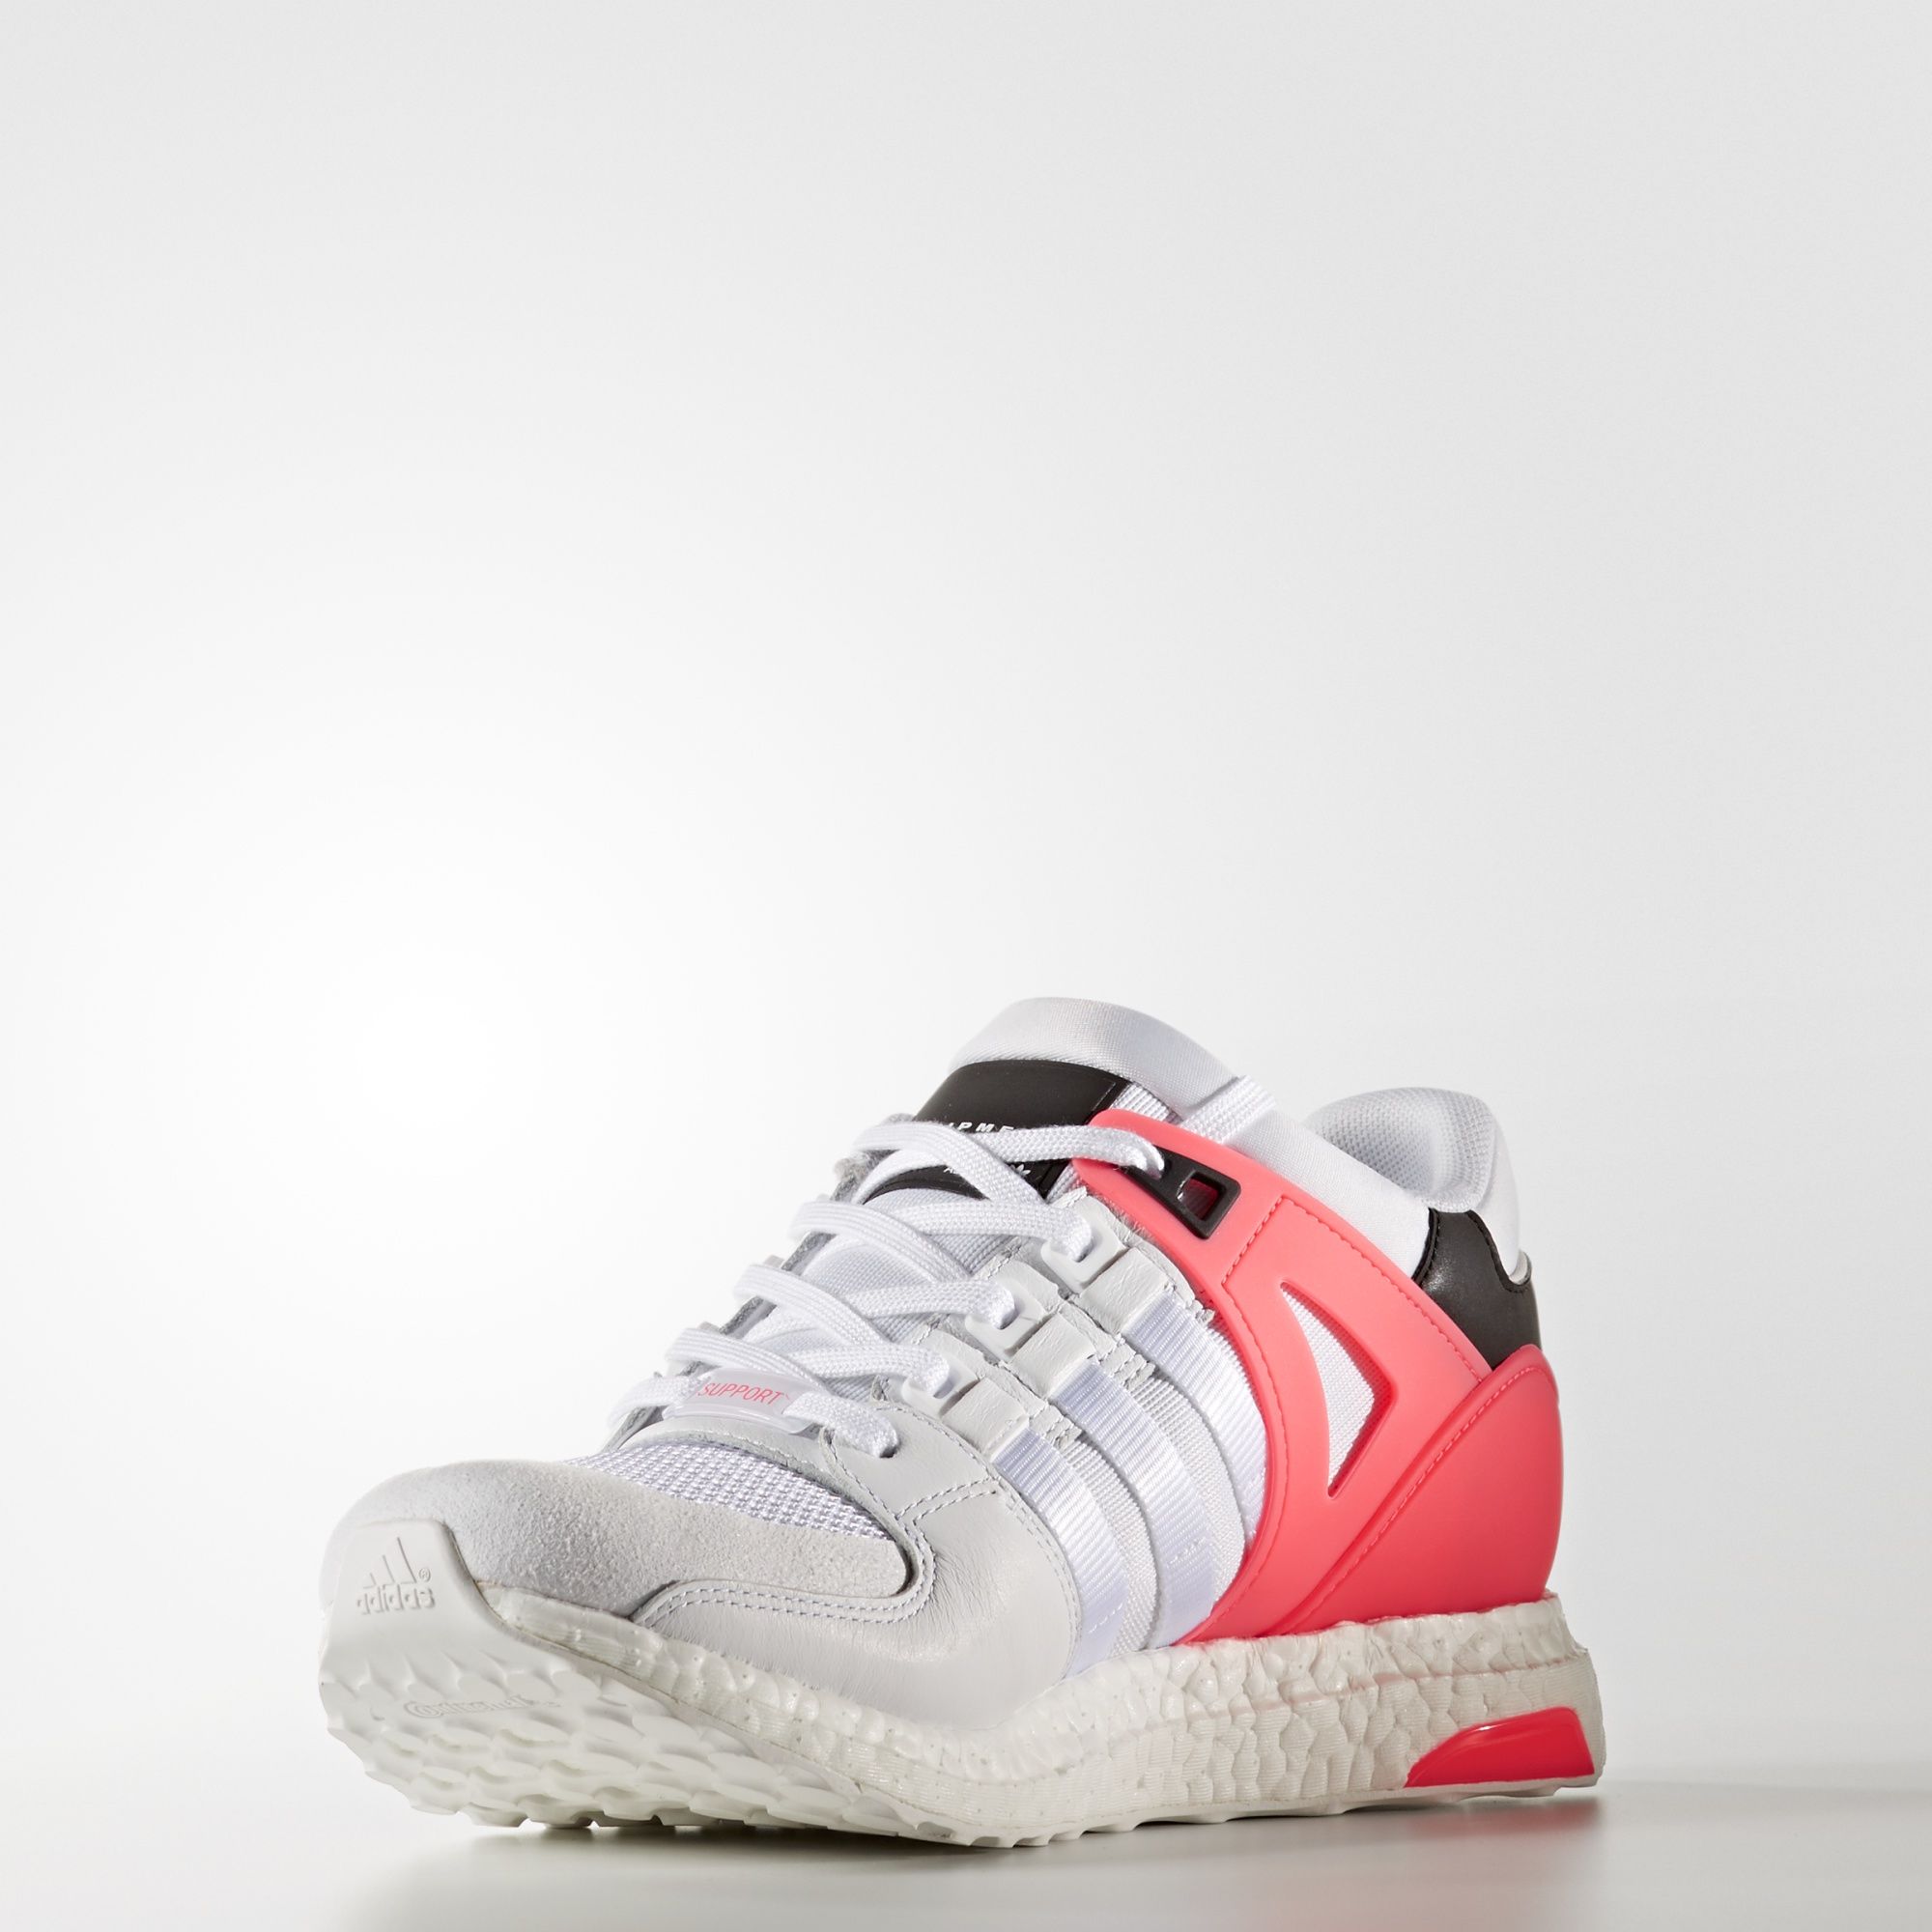 adidas-eqt-support-ultra-boost-white-turbo-red-3